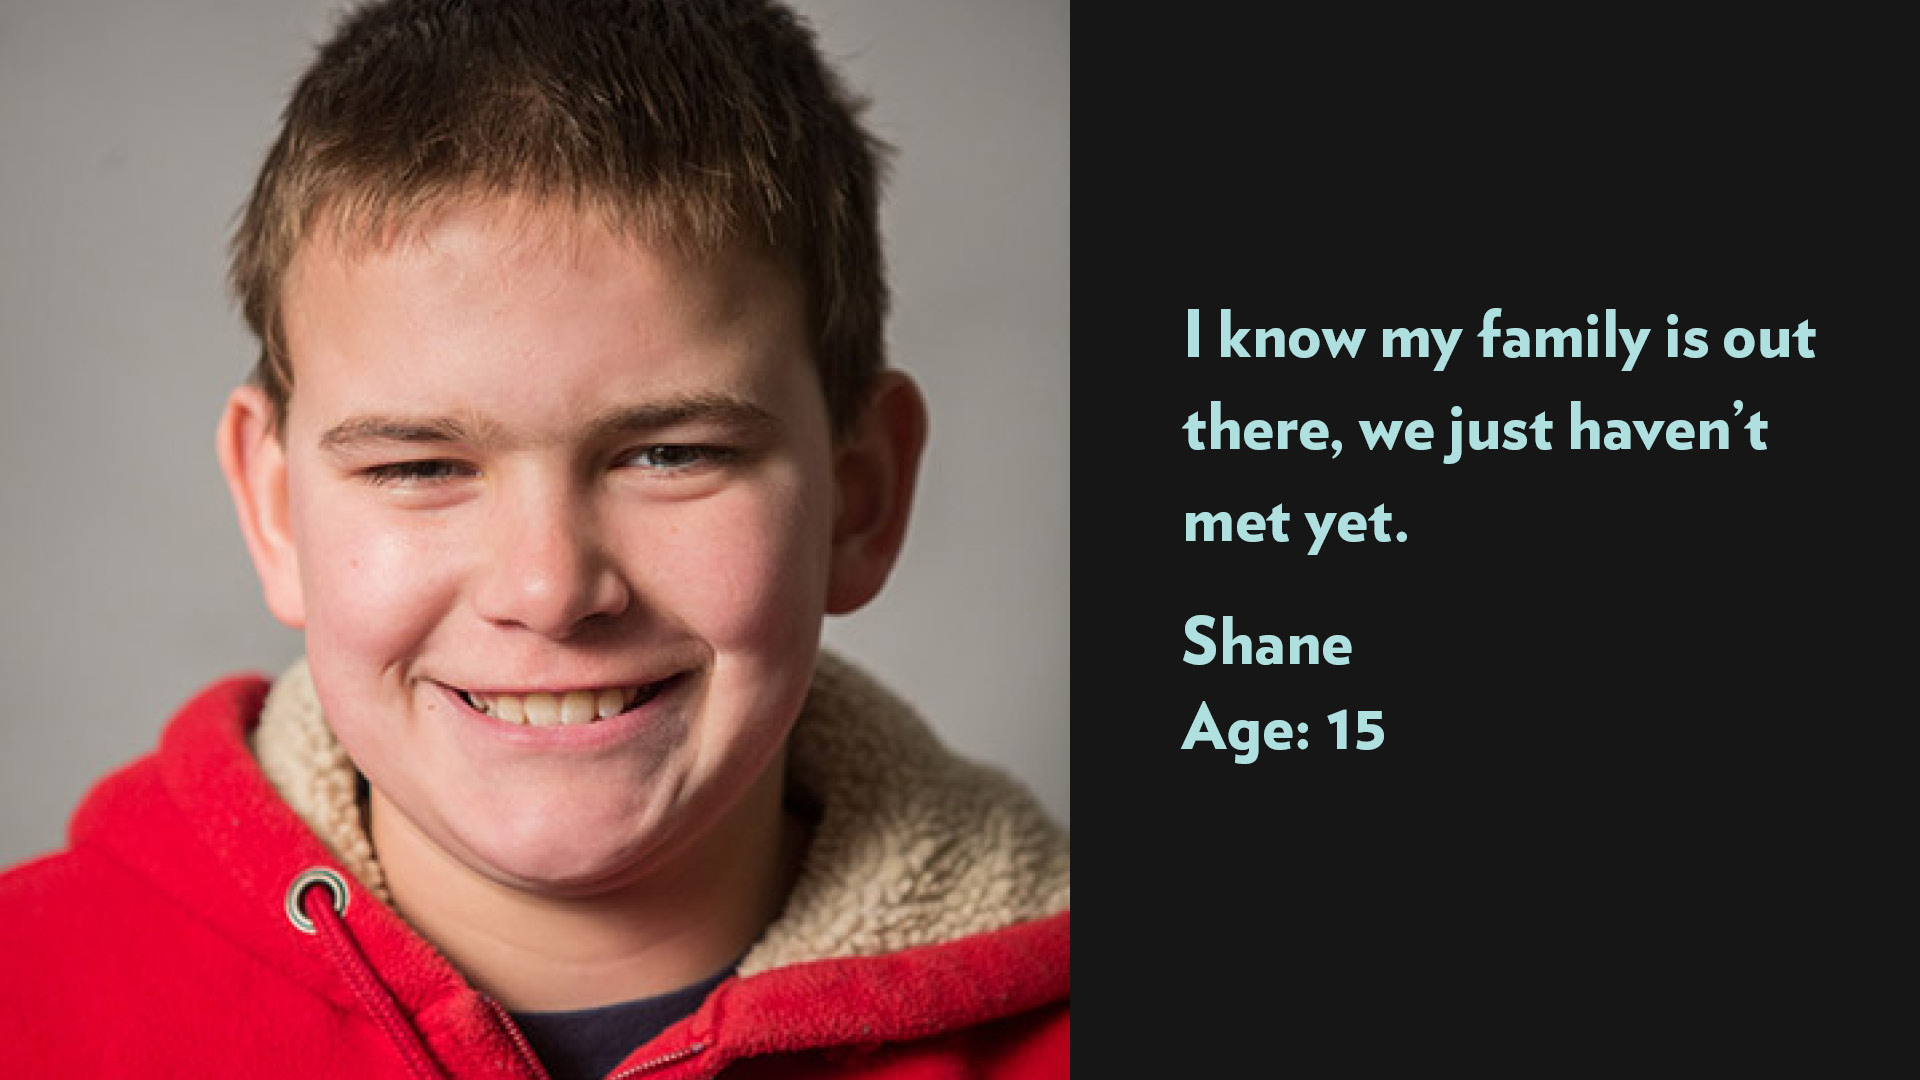 Shane, age 15. I know my family is out there, we just haven’t met yet.